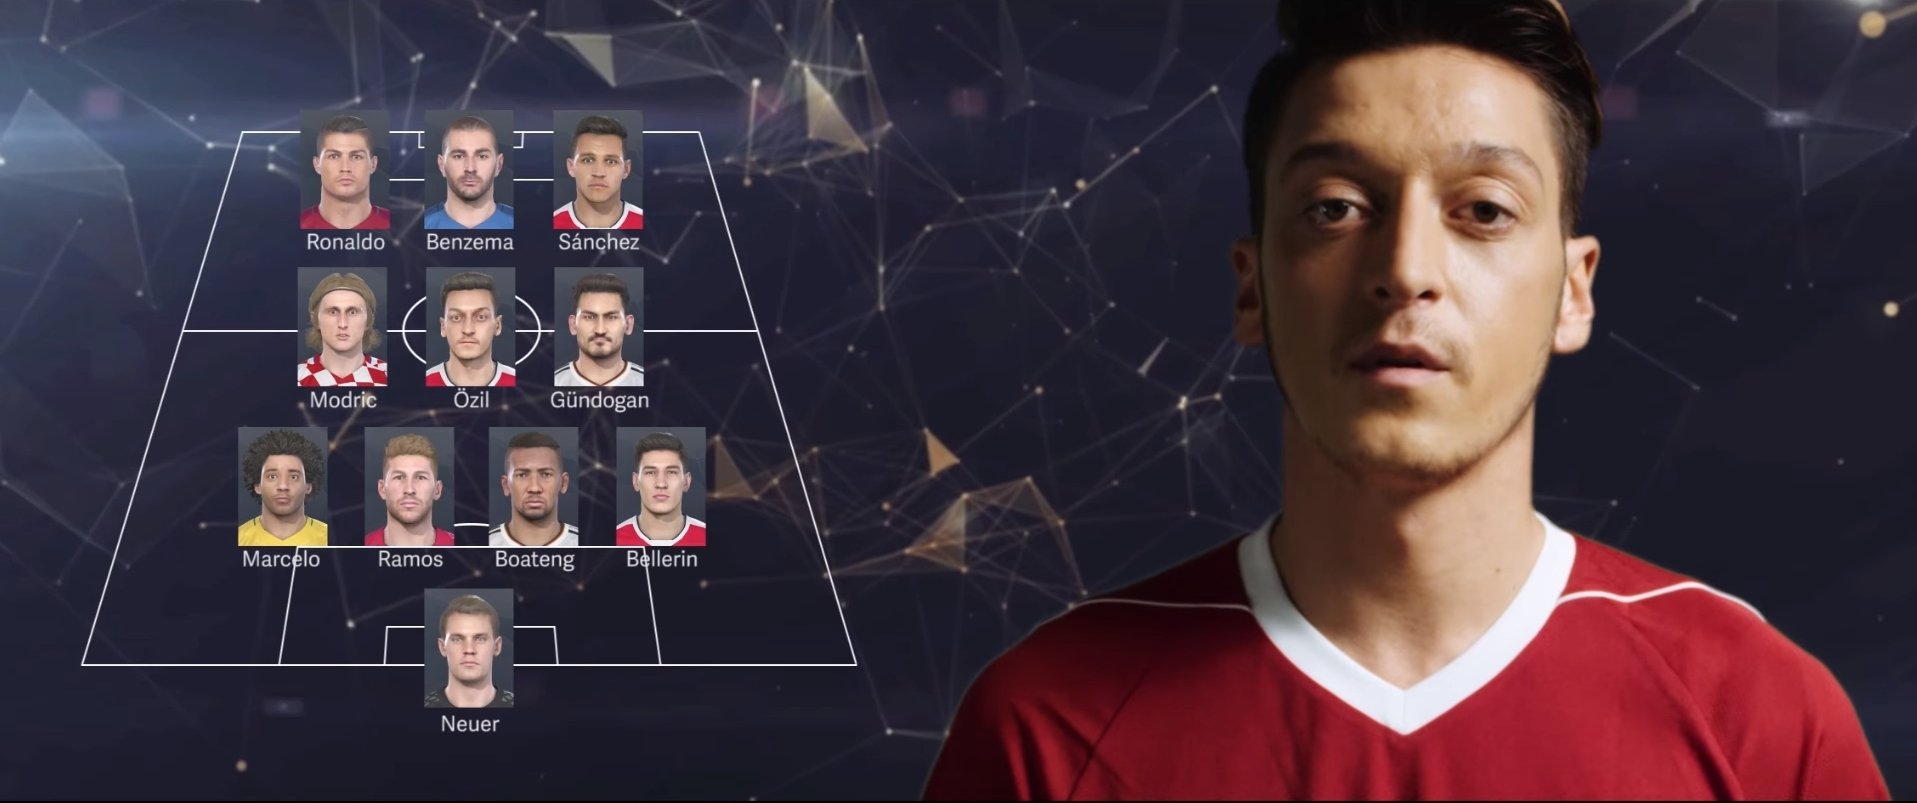 PES 2020 Has Removed German Arsenal Star Mesut Özil After Player Criticizes the Chinese Government